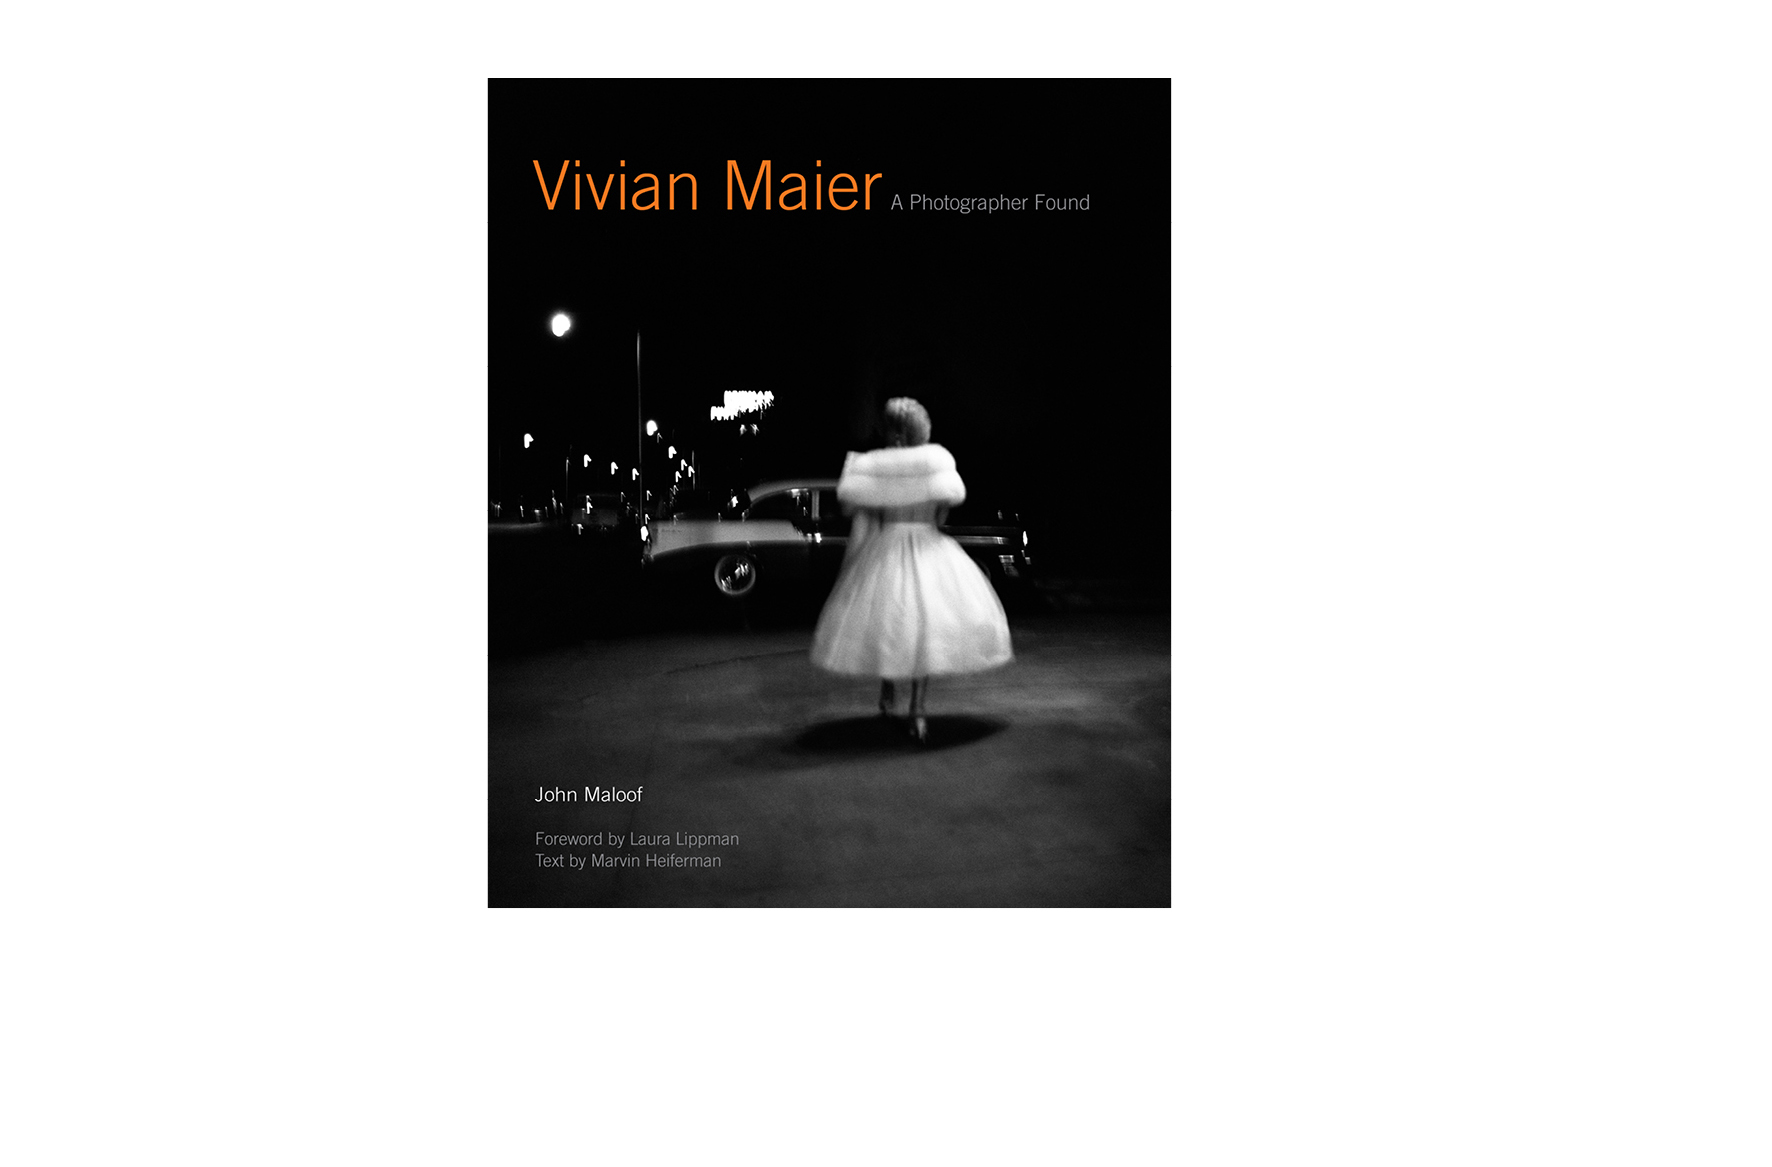   Vivian Maier: A Photographer Found -  10.25 X 12.5 in., 288 pg., hardcover with jacket. Design; Galen Smith // Publisher; Harper Design     